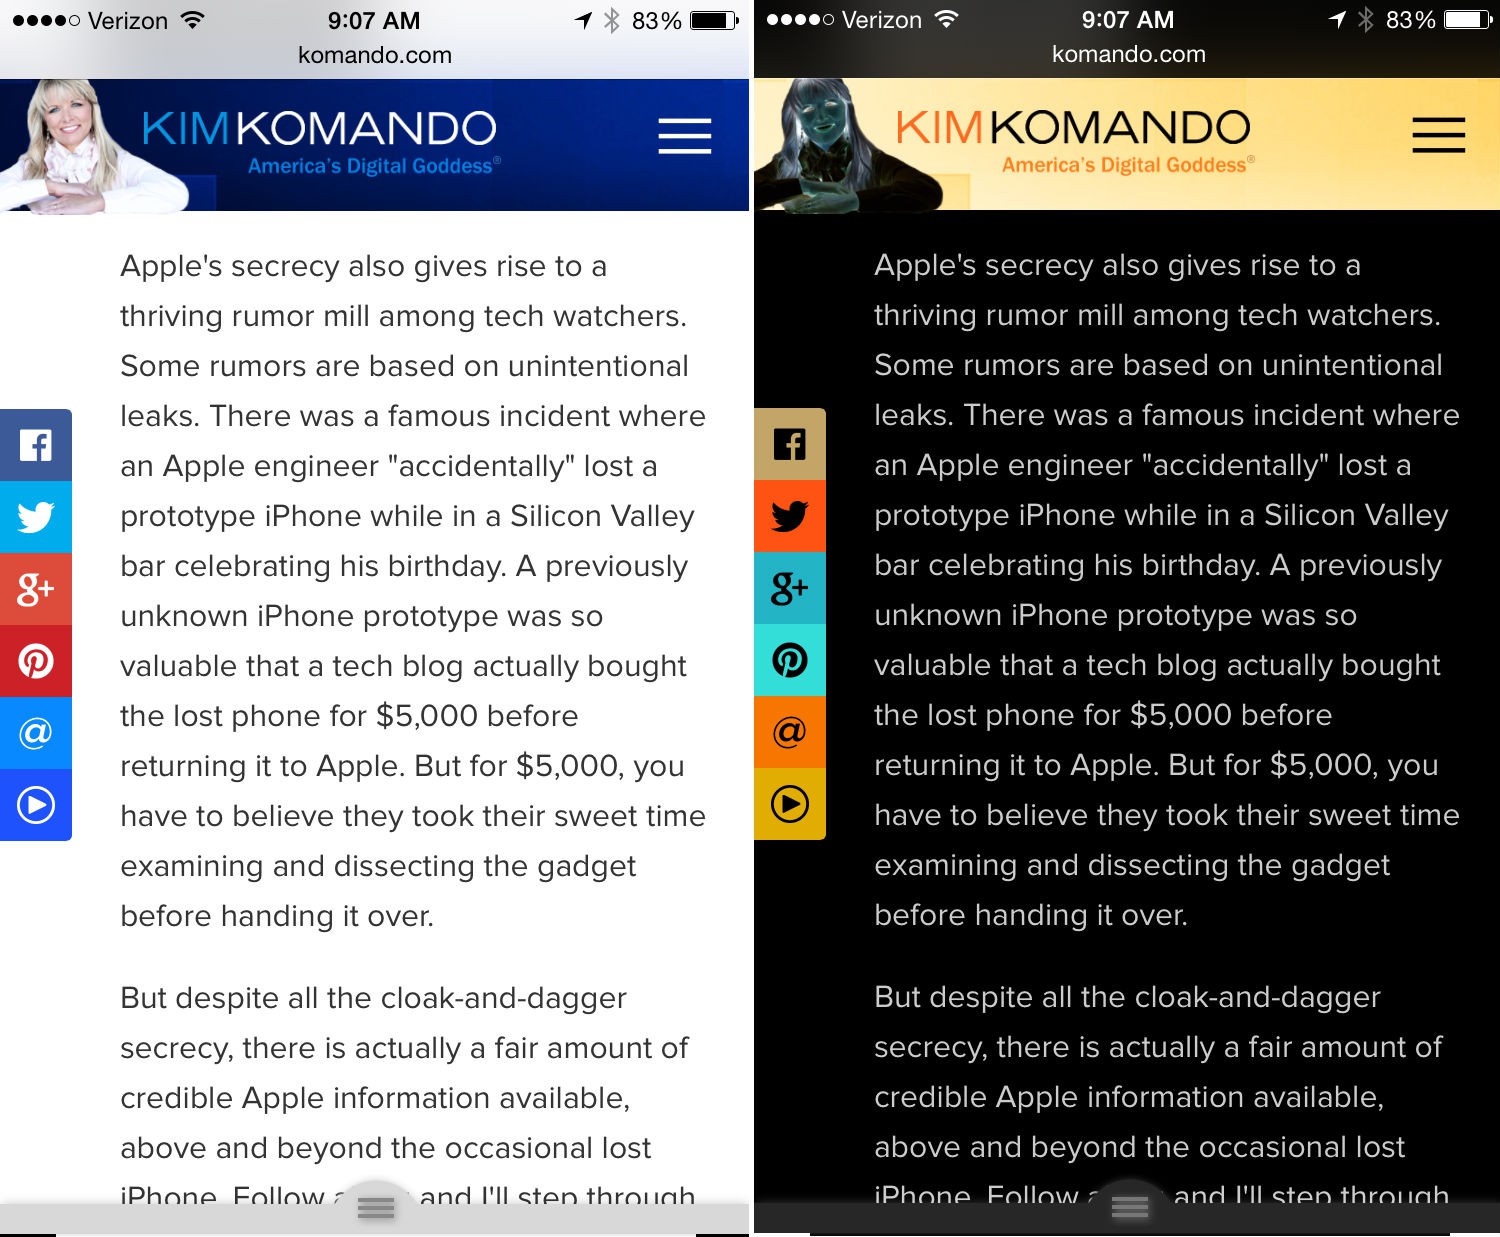 Komando.com on iPhone with inveted screen colors